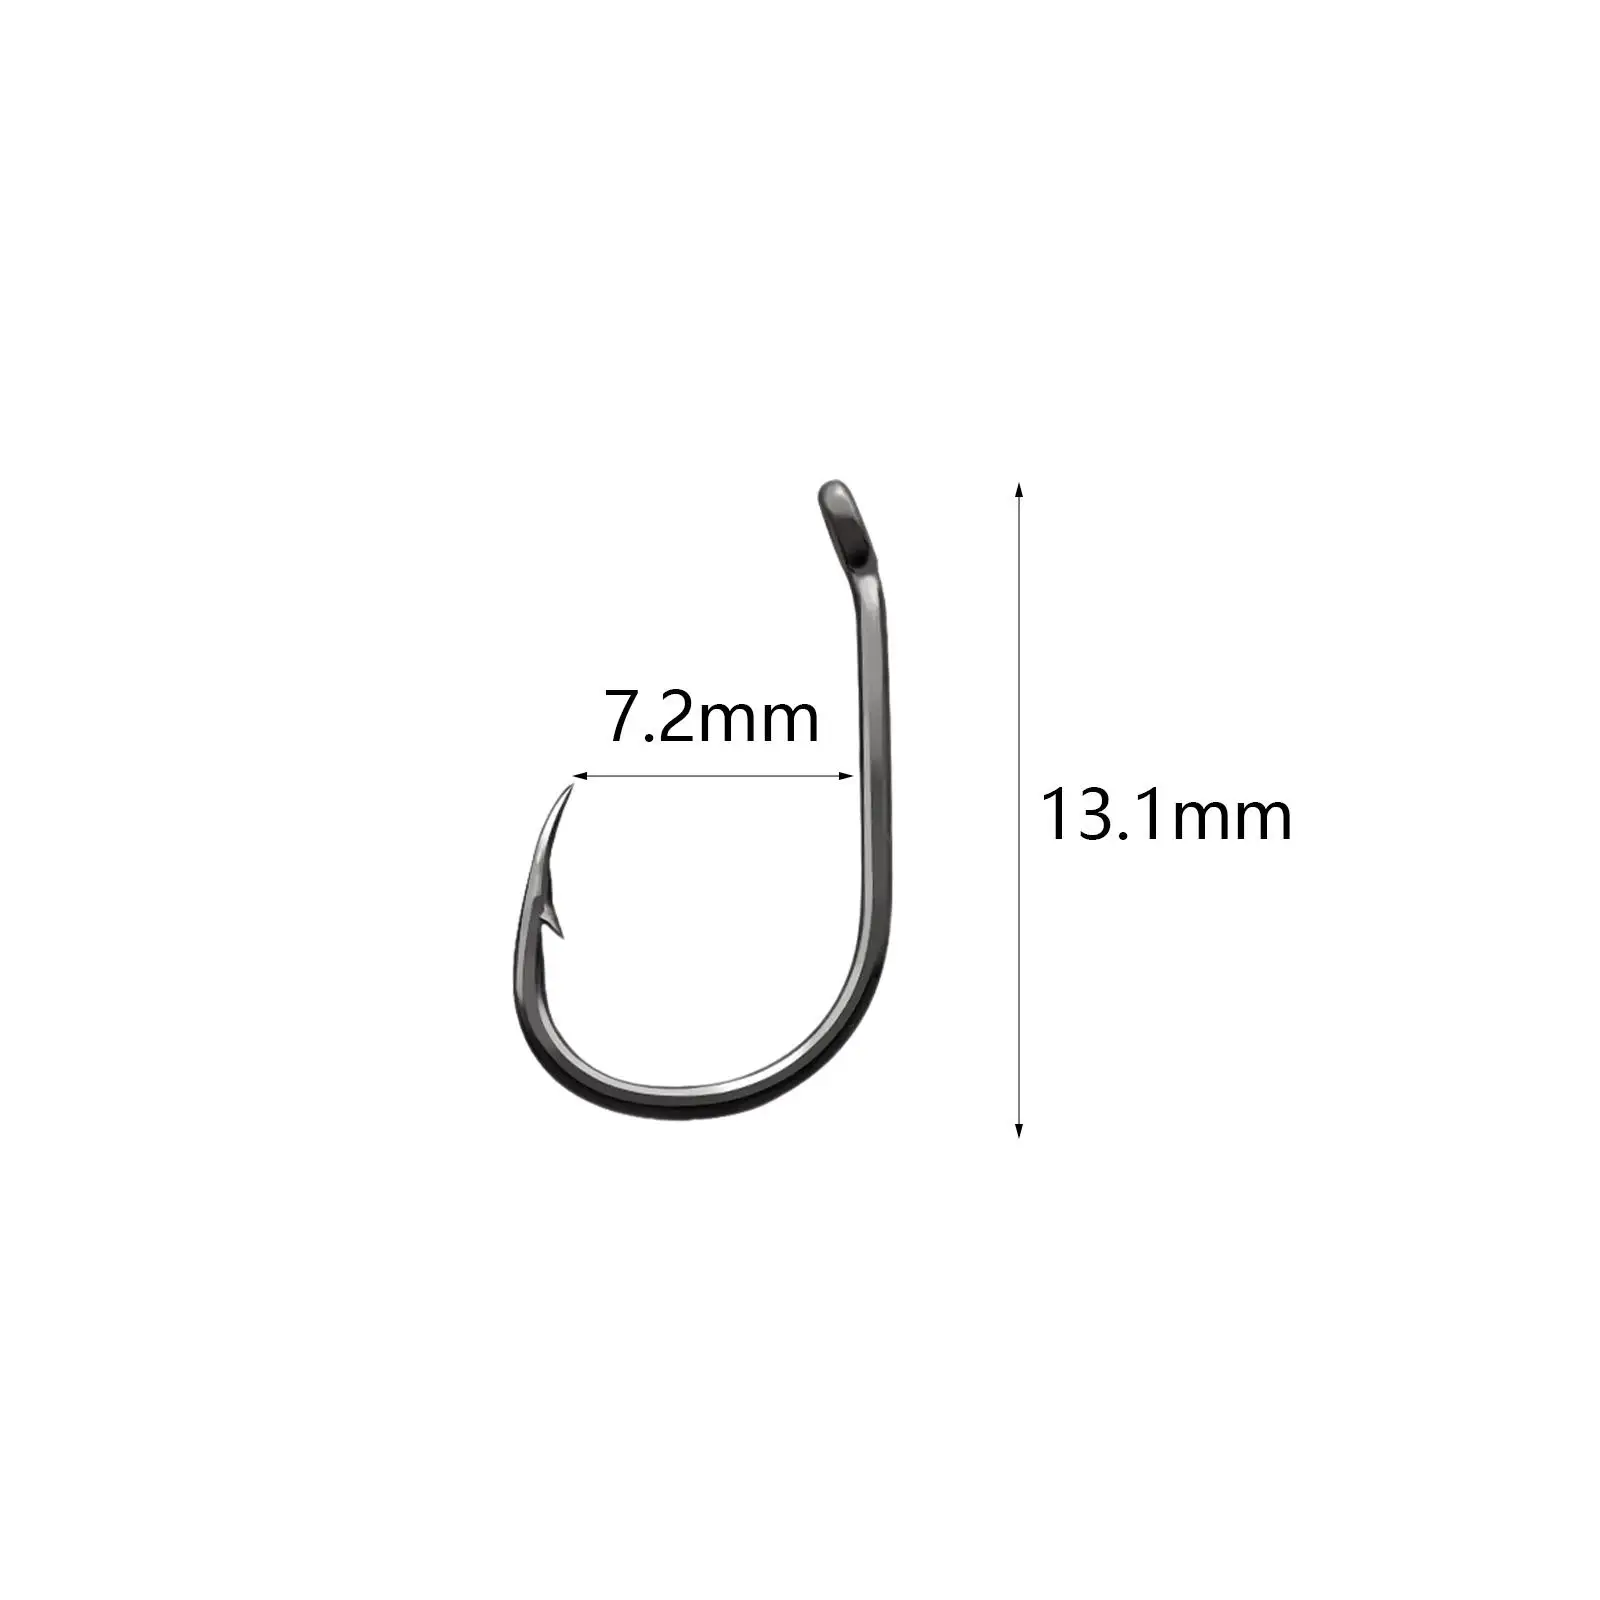 50Pcs Fly Fishing Hooks Tools Fishing Supplies Versatile Equipment Practical Fly Hooks for Saltwater Freshwater Sports Outdoor